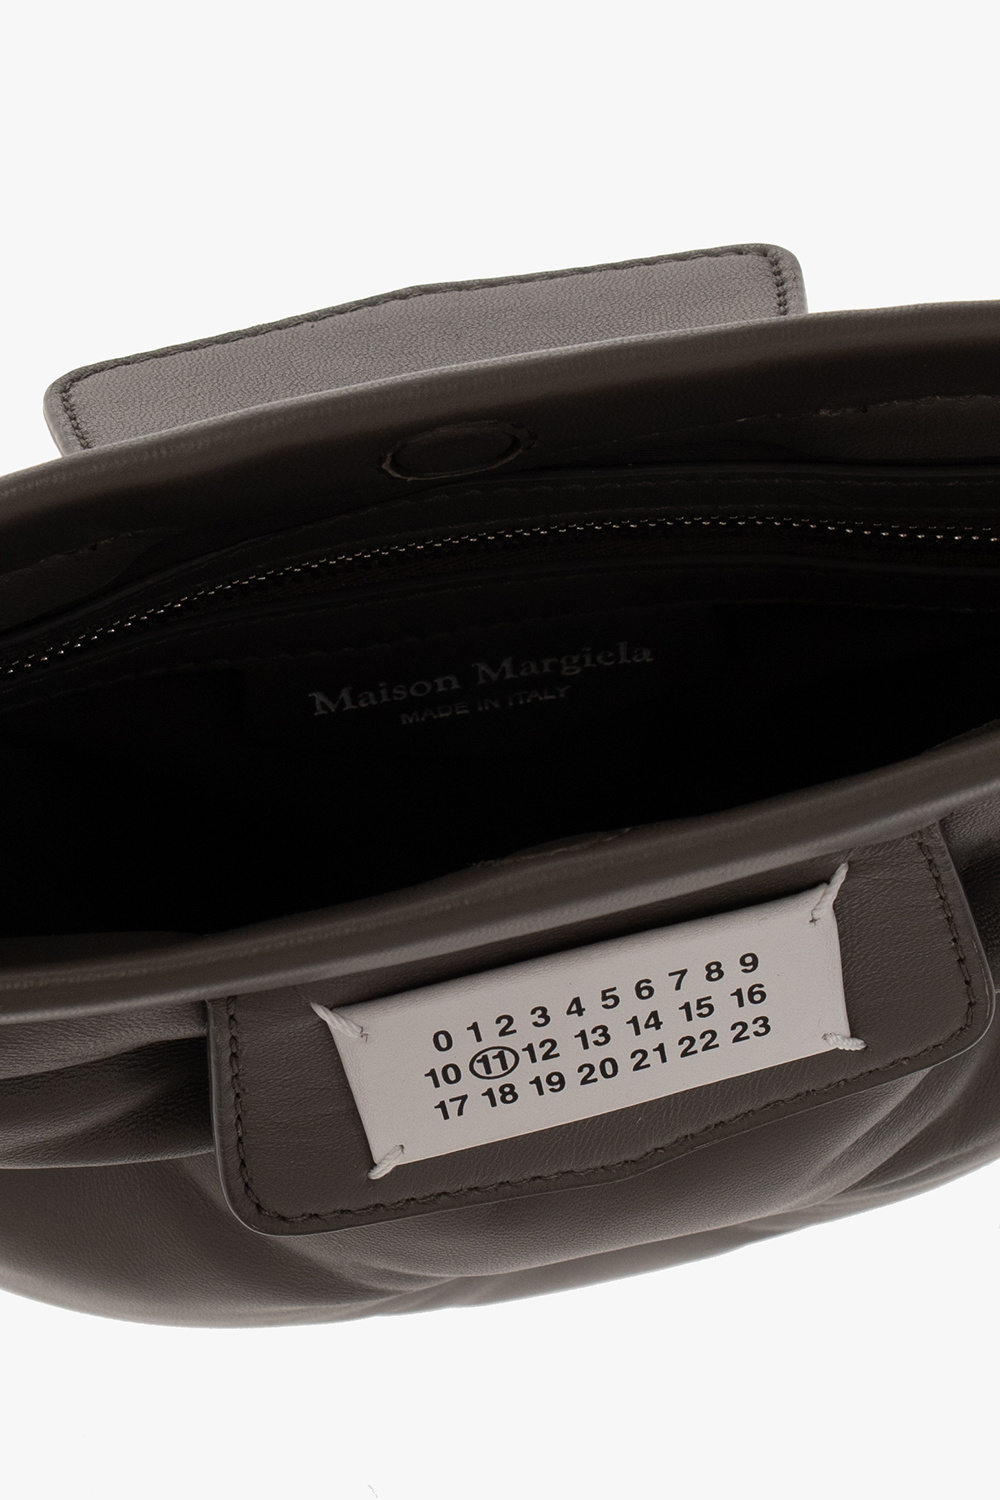 Maison Margiela Unless the red carpet event in question centers around a brands bags